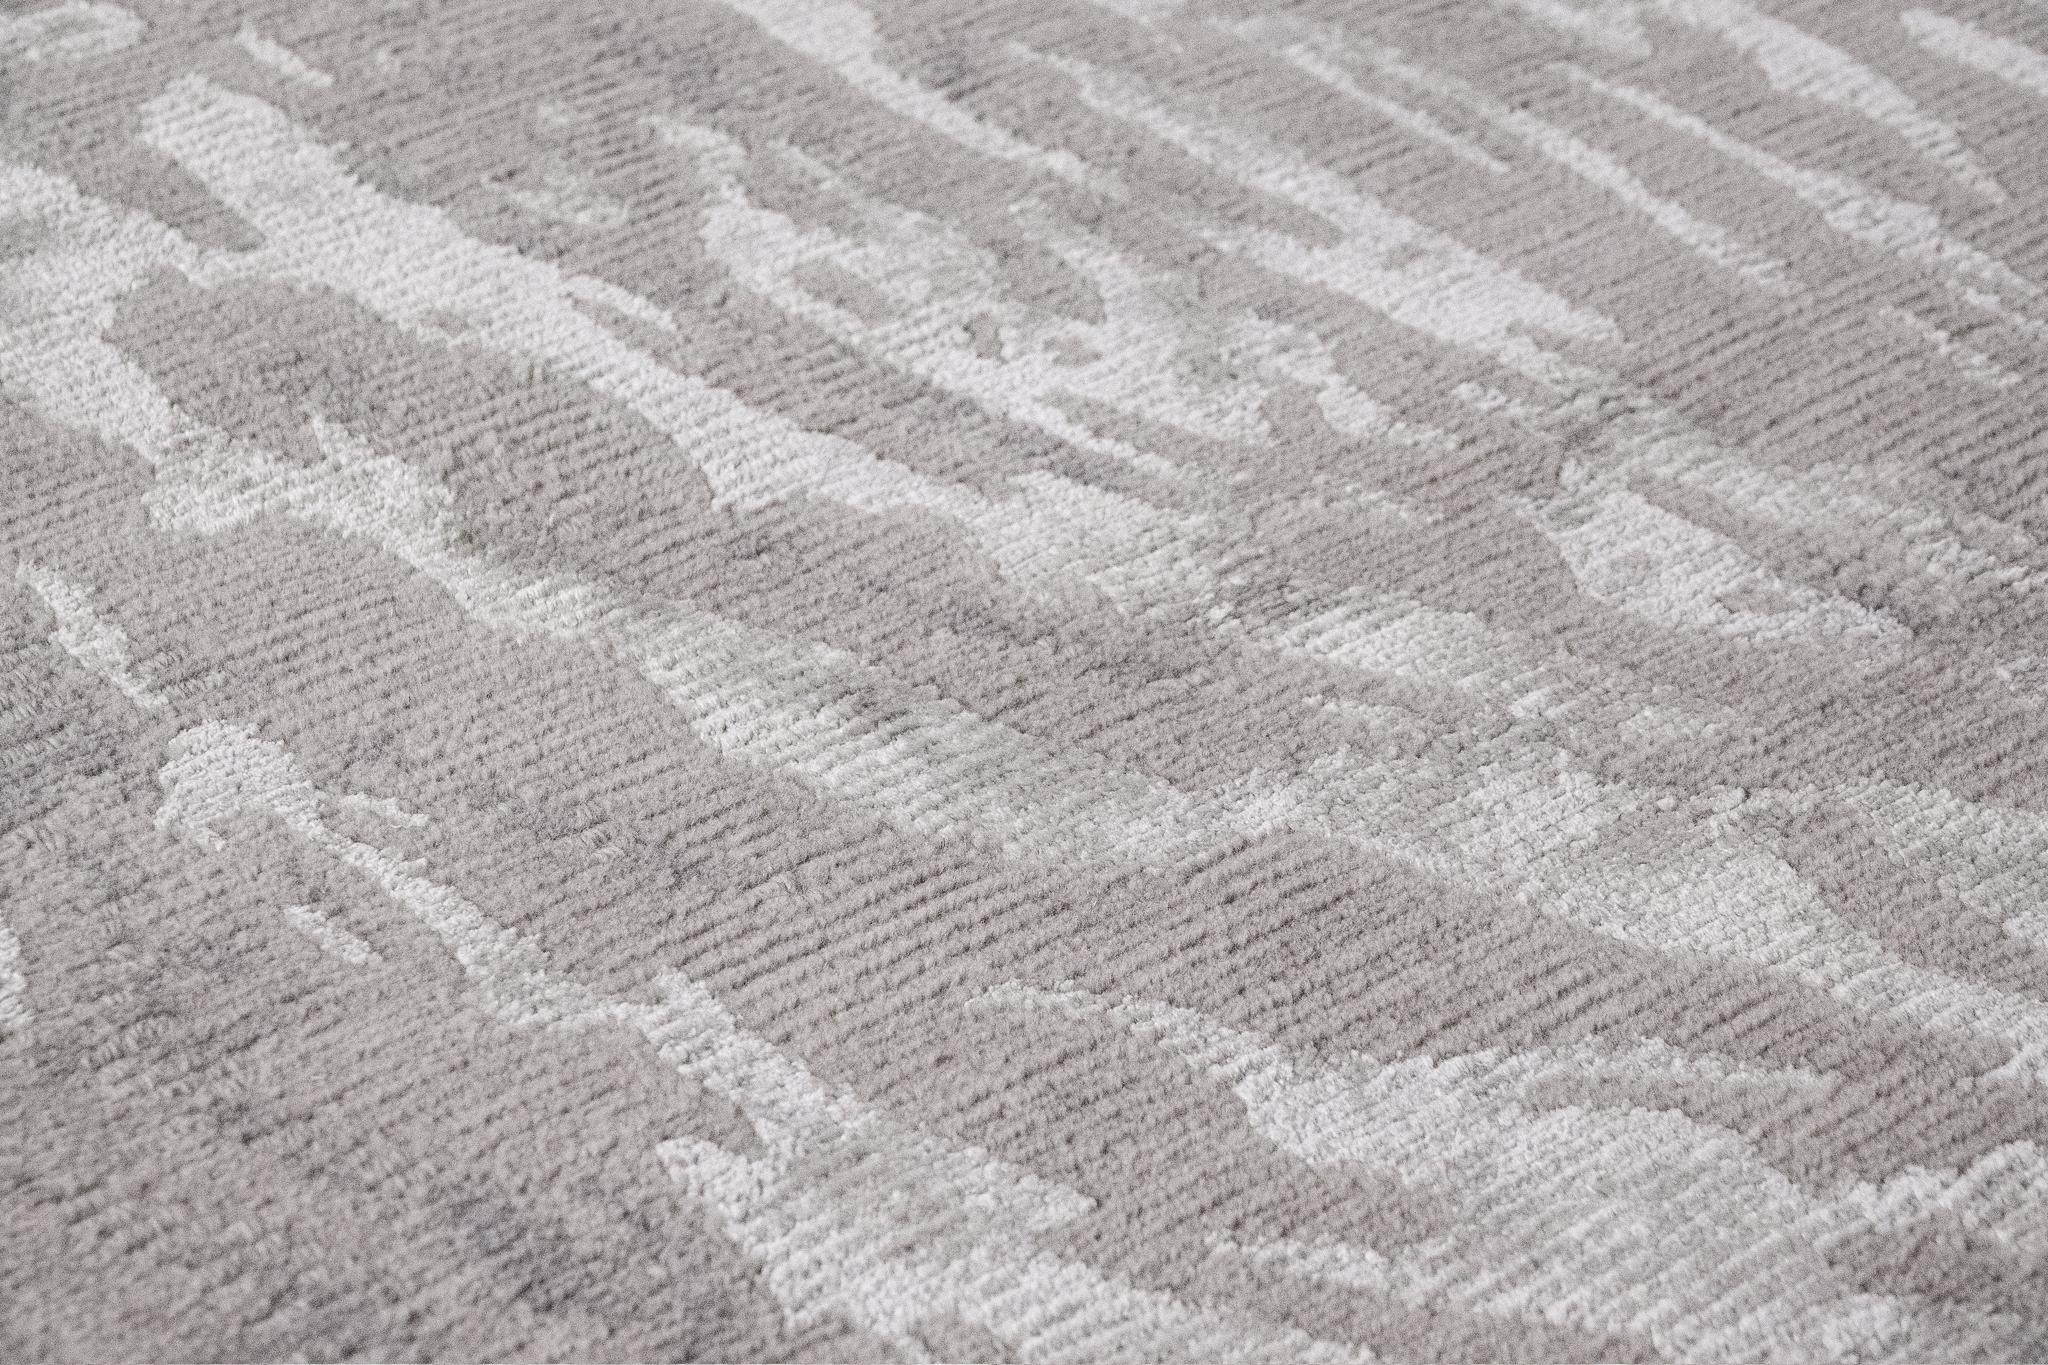 Maison Six collection is simplicity attained by complex combinations of plain wool, tencel and allo, completed in beige, grey and white.

Free virtual rug fitting - just send us pics of your interior and we suggest you the best designs, shapes,